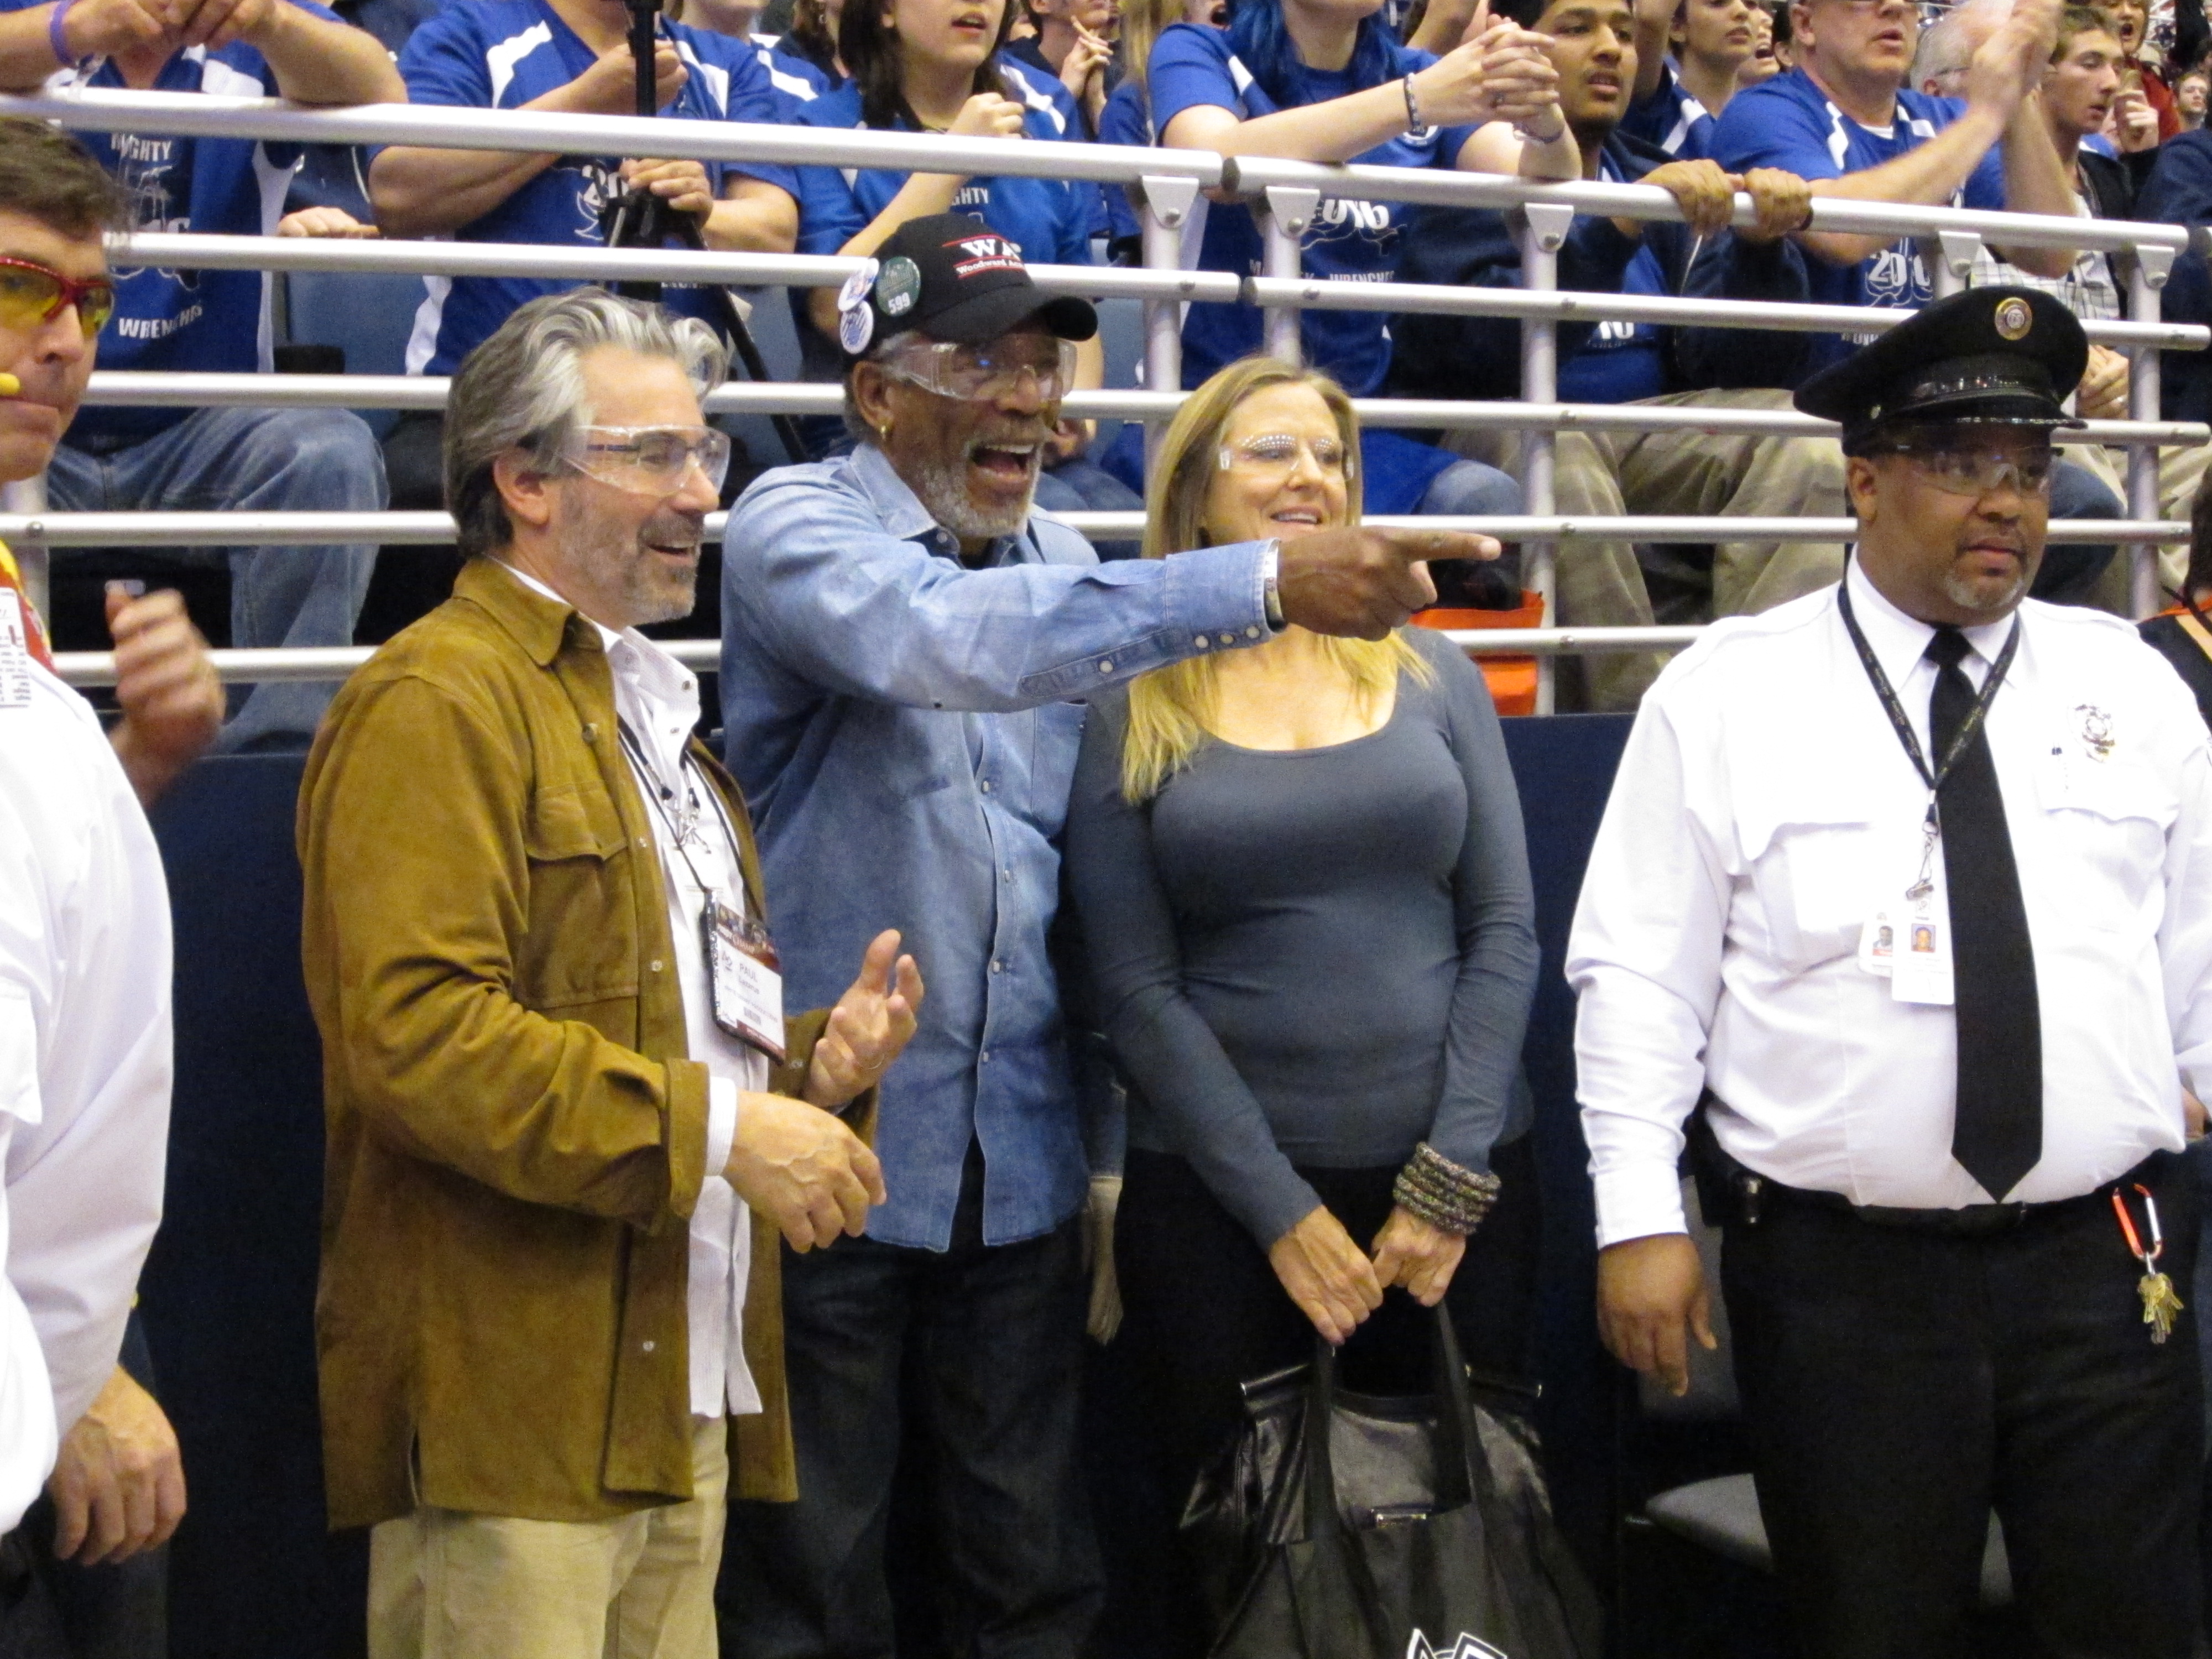 With Morgan Freeman and Lori McCreary at FIRST Robotics Championship in St. Louis in April of 2011